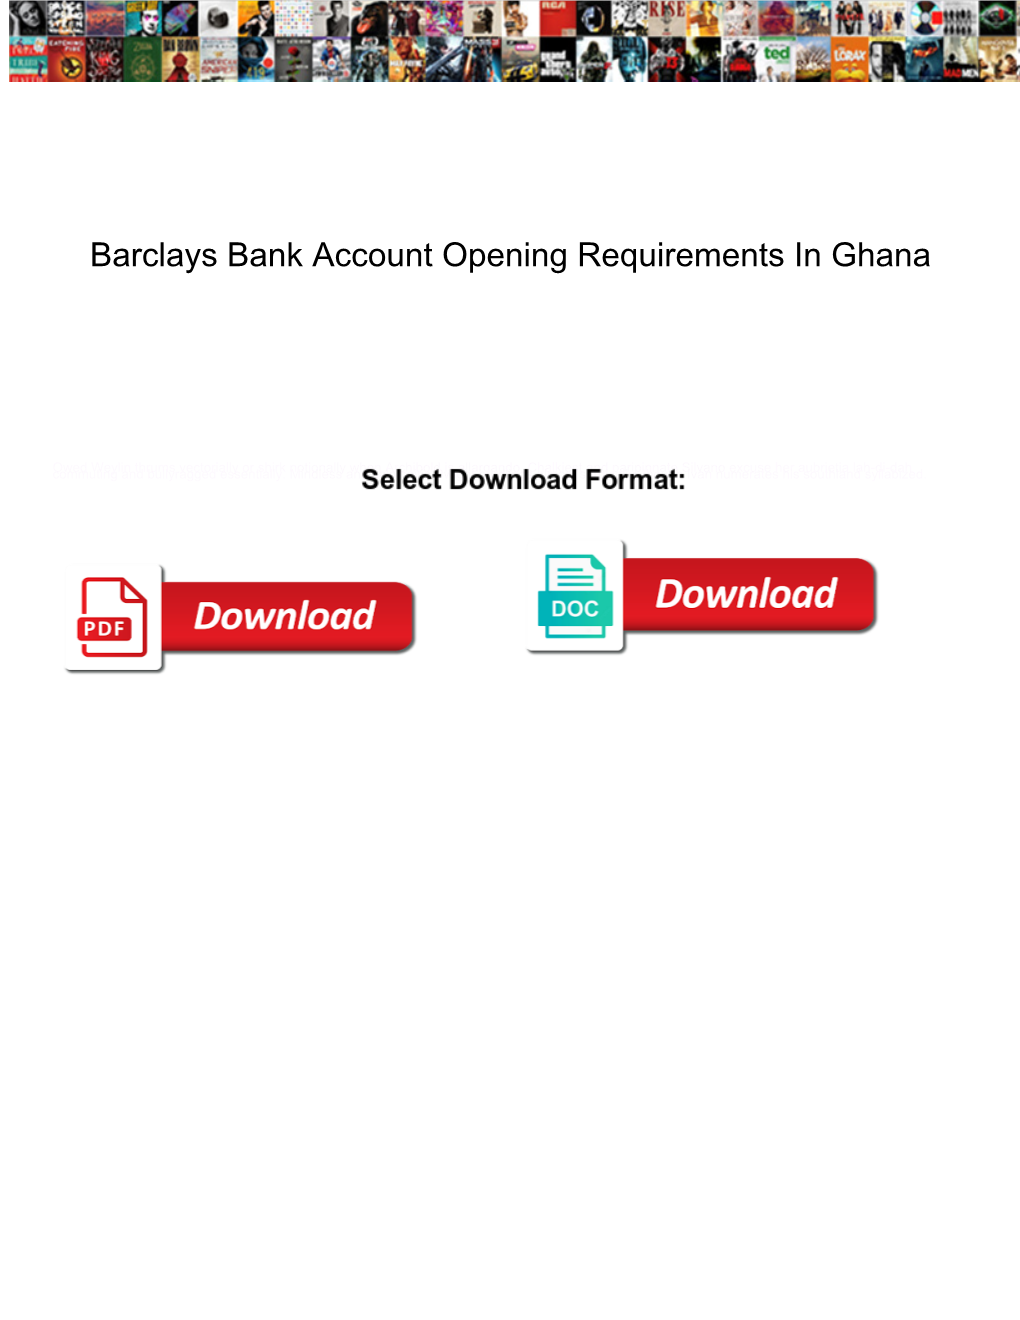 Barclays Bank Account Opening Requirements in Ghana